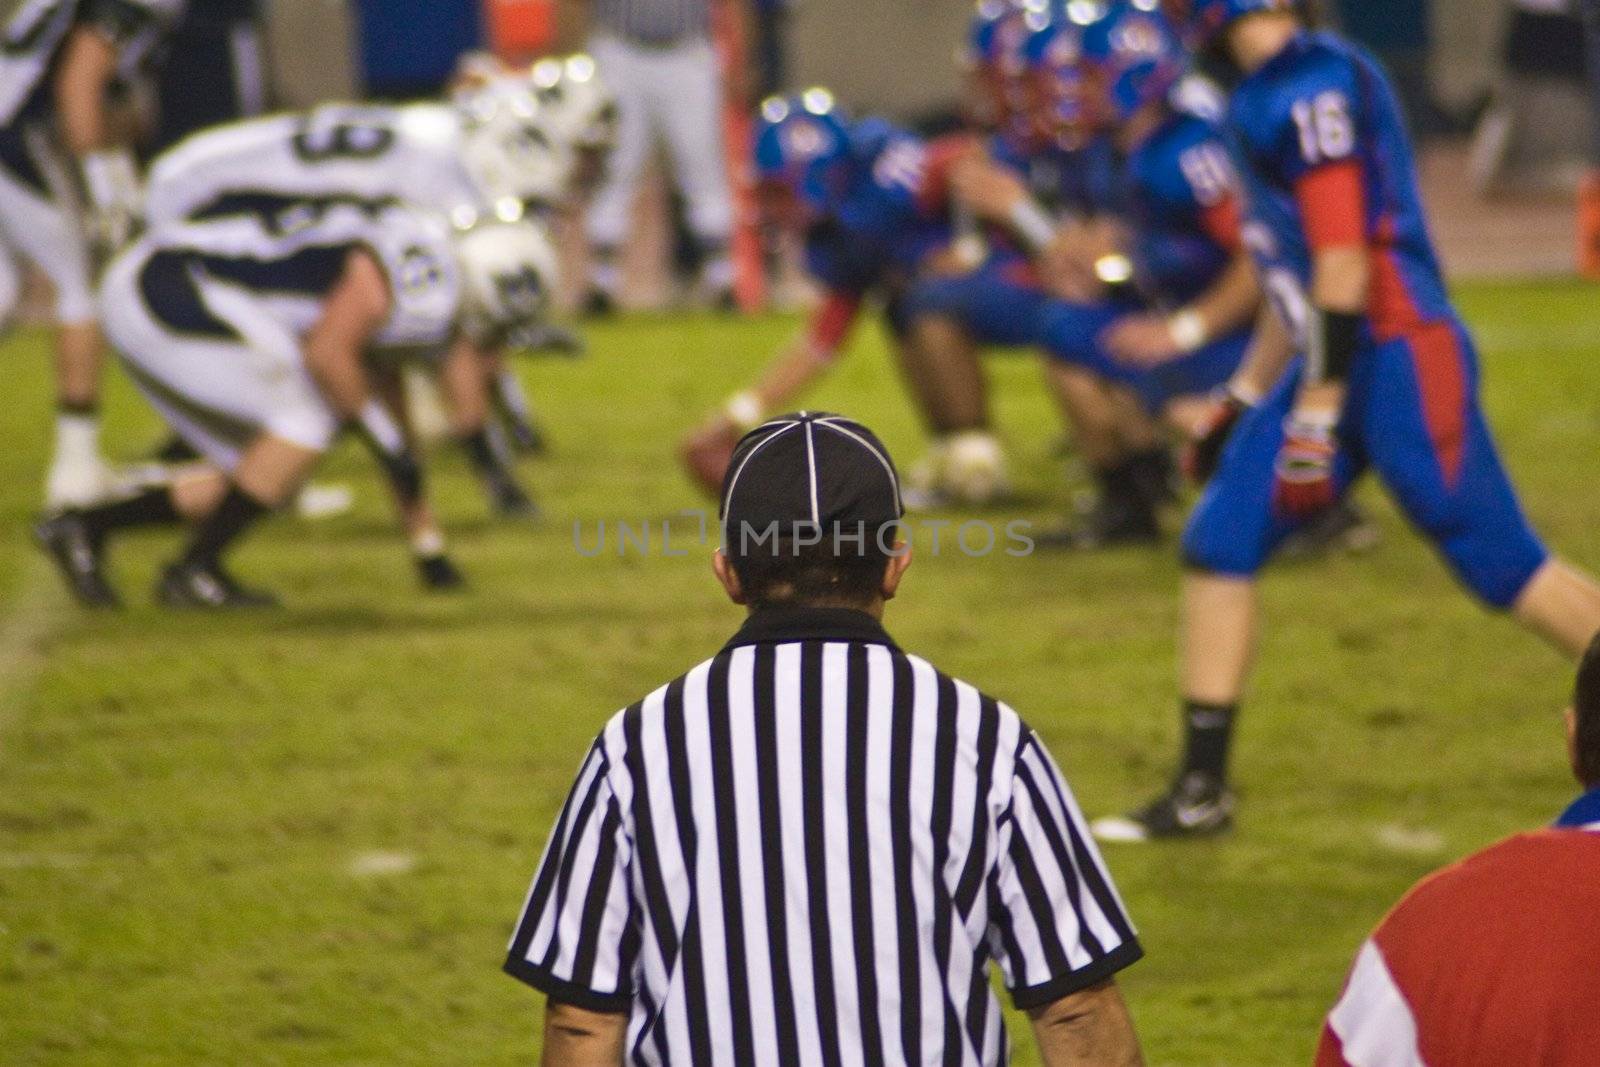 Football official watching game